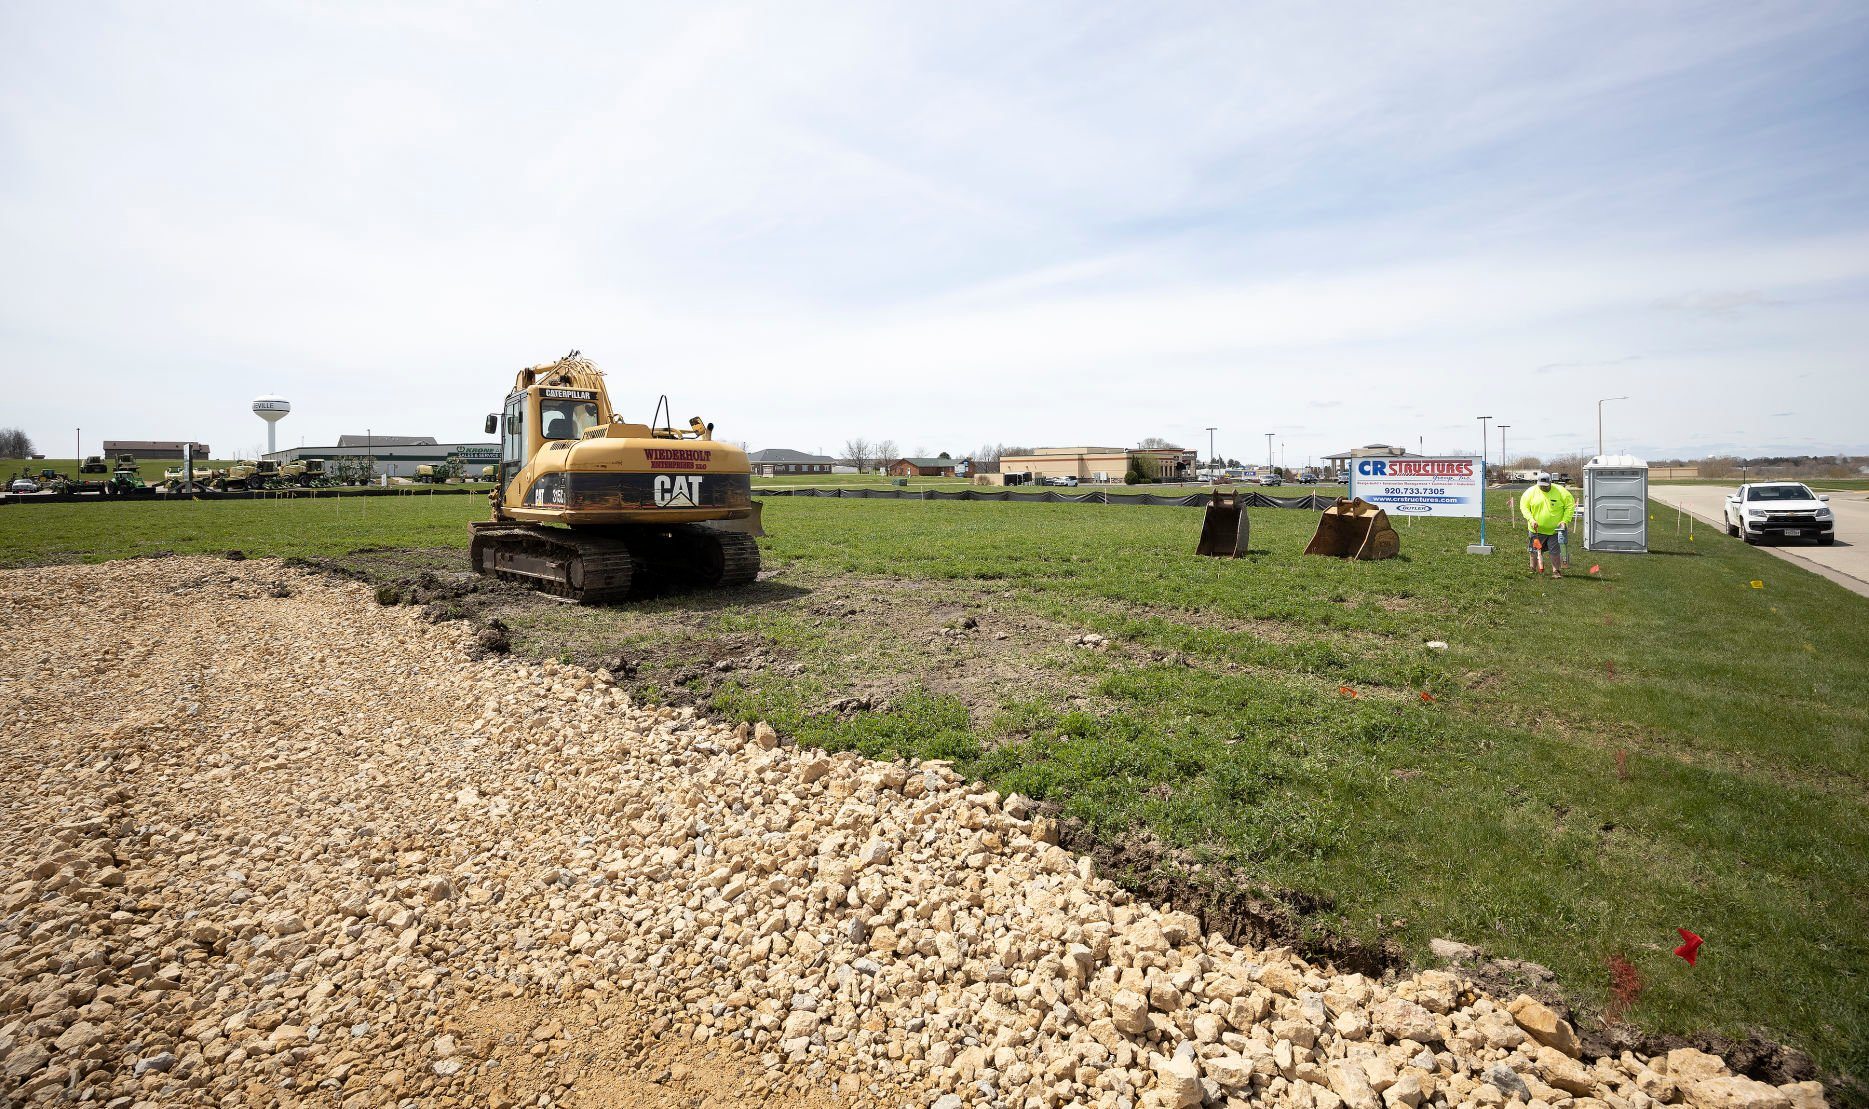 Construction equipment sits on the future site of a new Arby’s restaurant on Progressive Parkway in Platteville, Wis.    PHOTO CREDIT: Stephen Gassman, Telegraph Herald